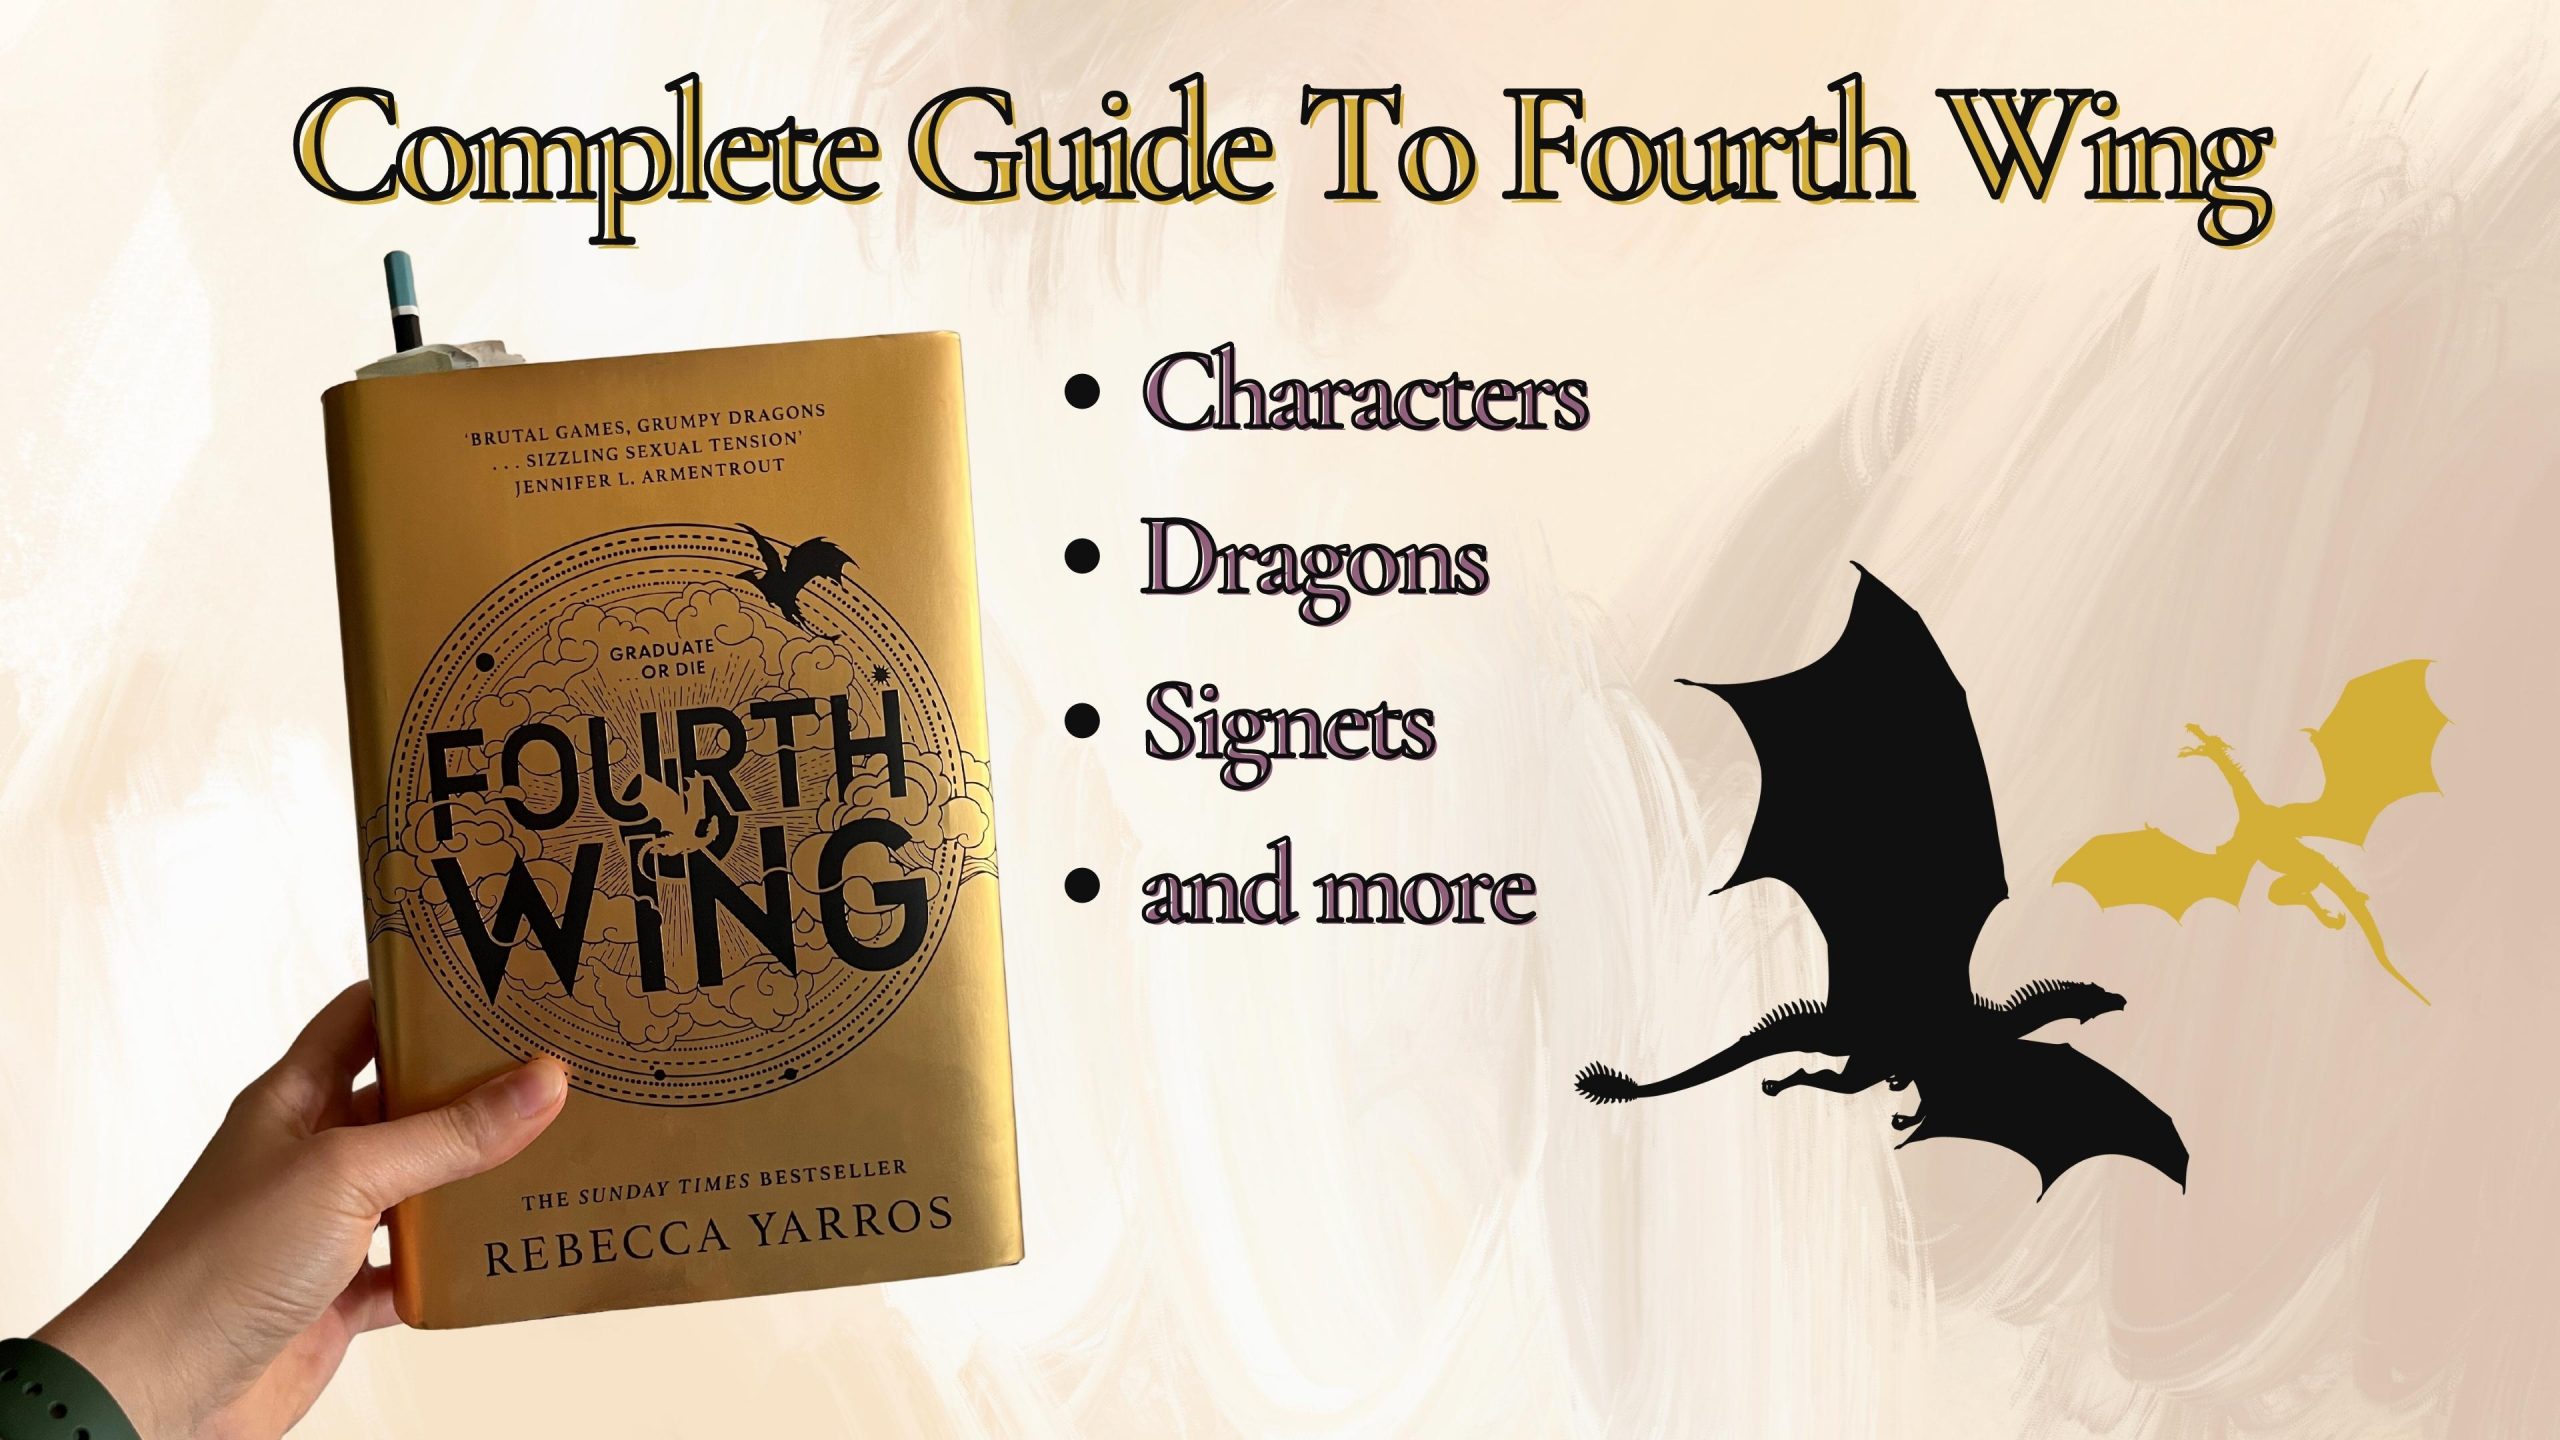 Guide to Fourth Wing: Learn about Characters, Dragons, Signets and more